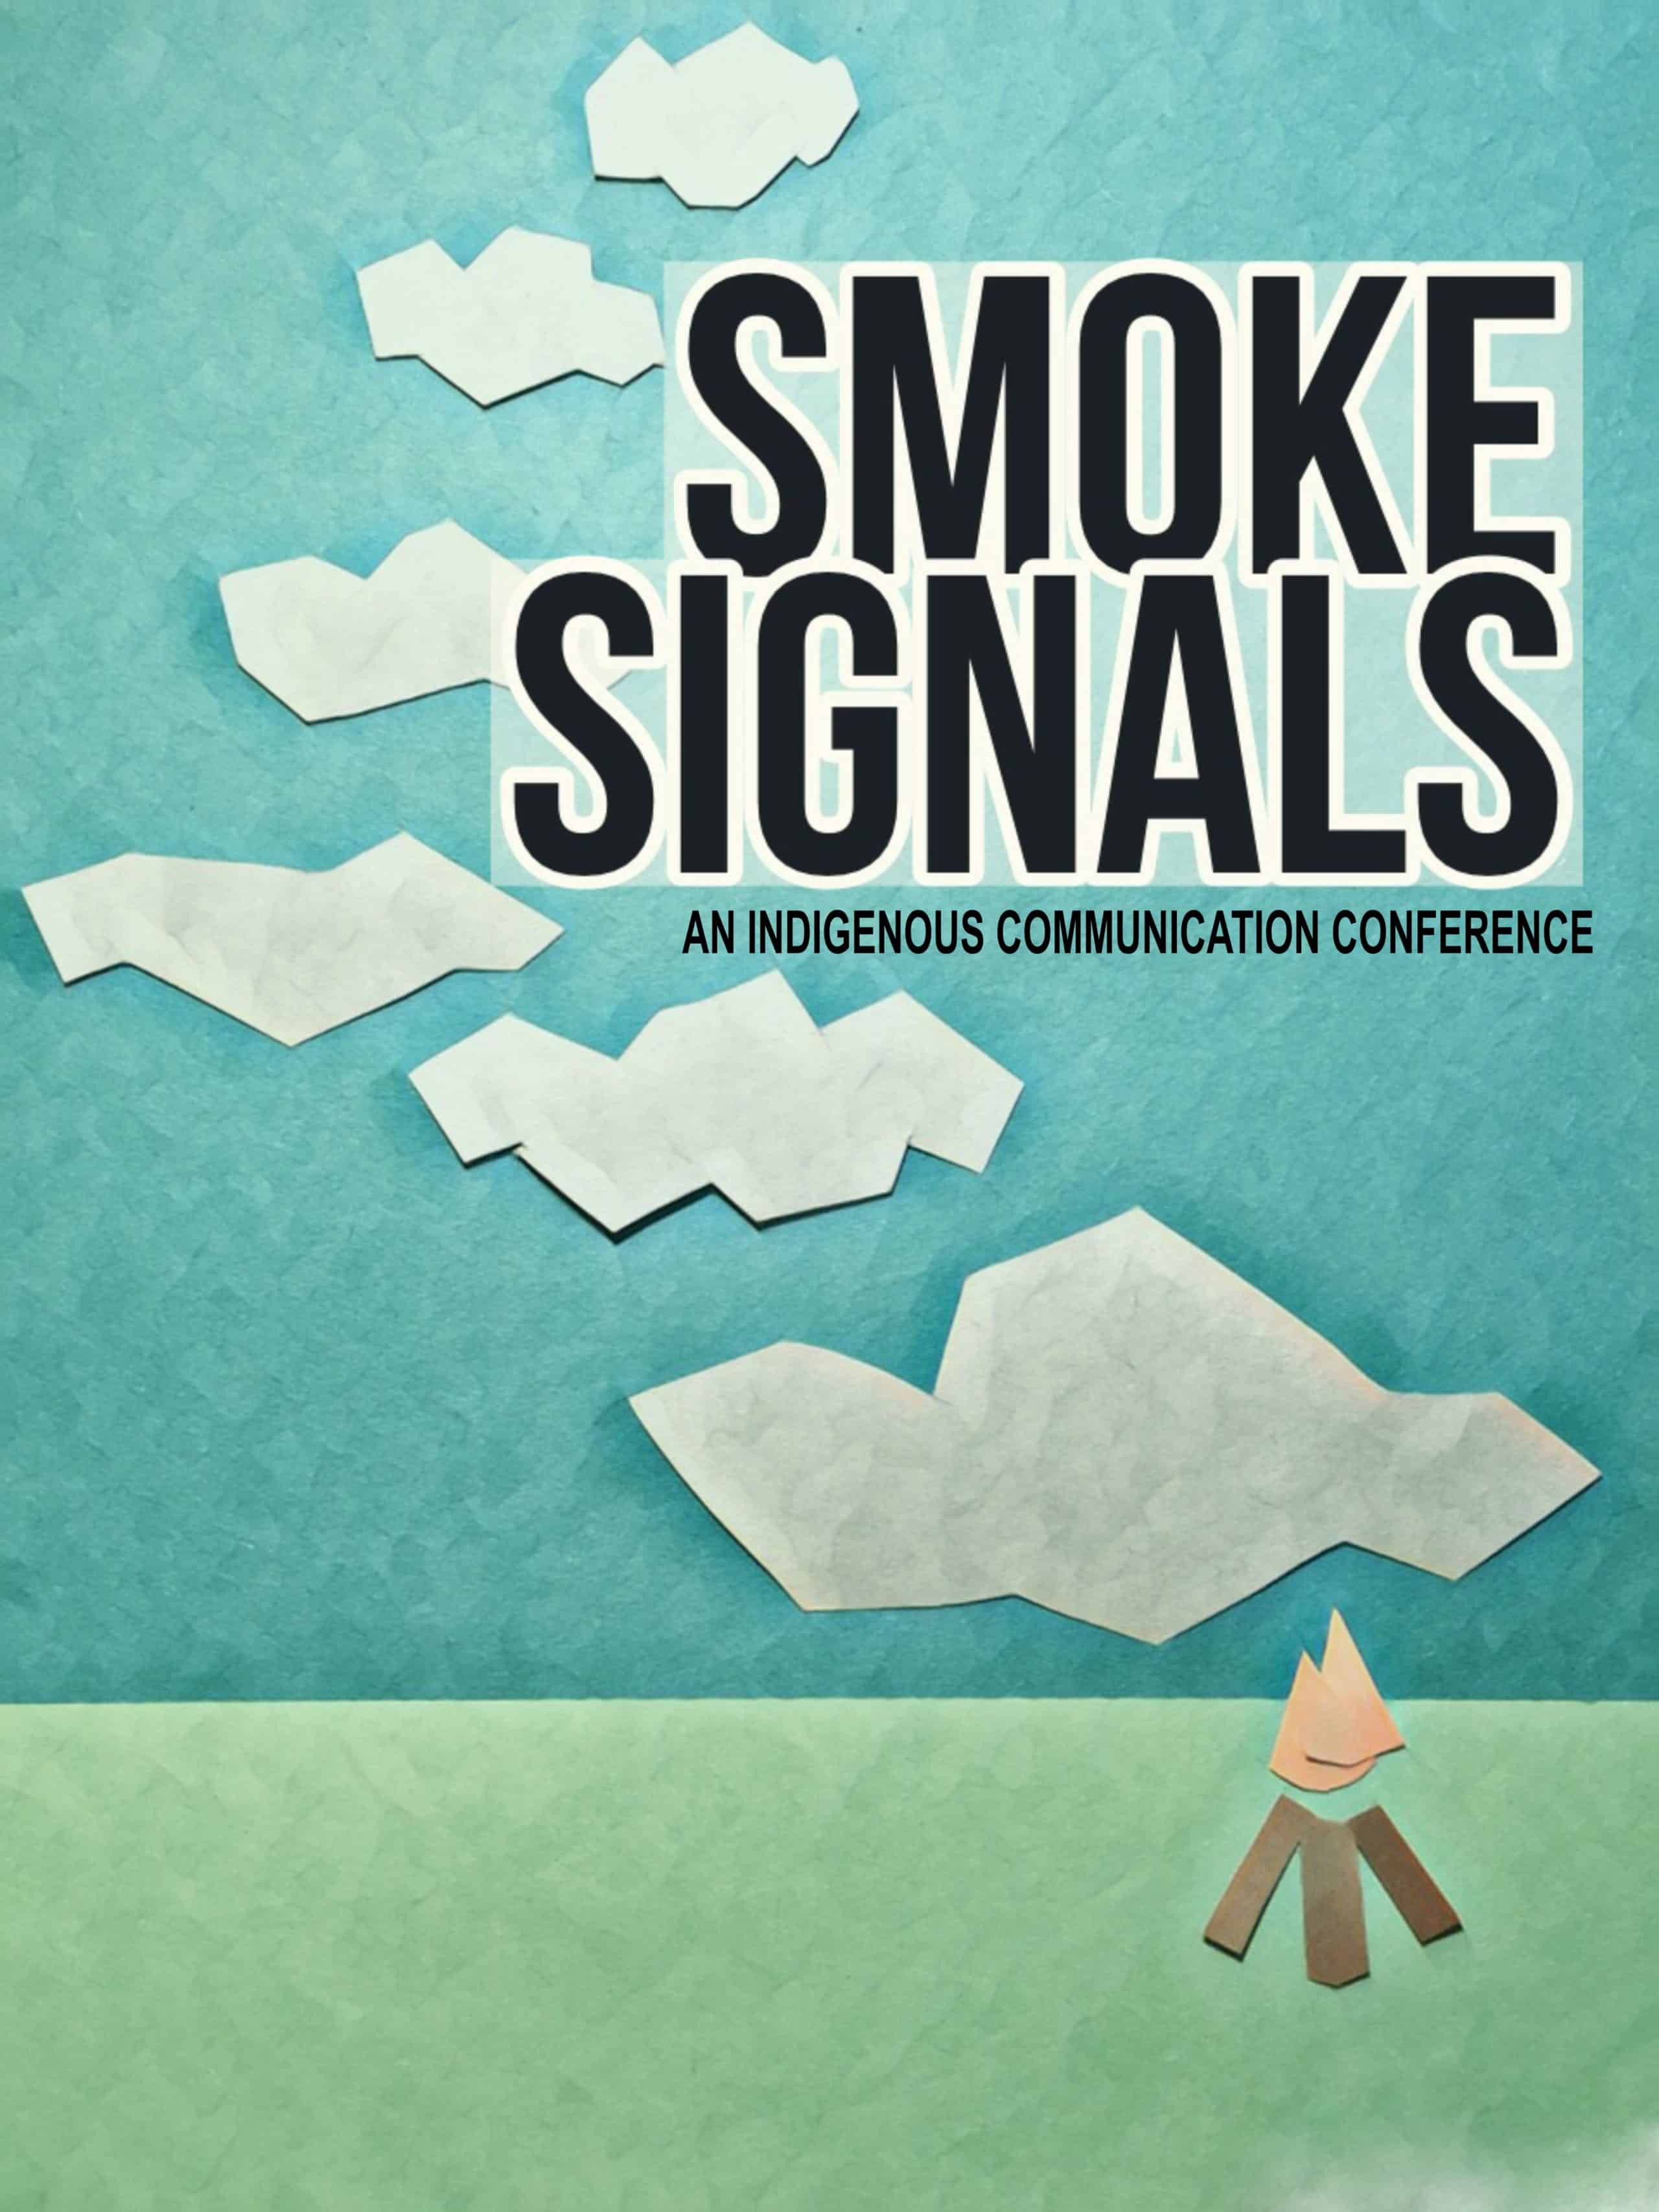 thesis statement of smoke signals